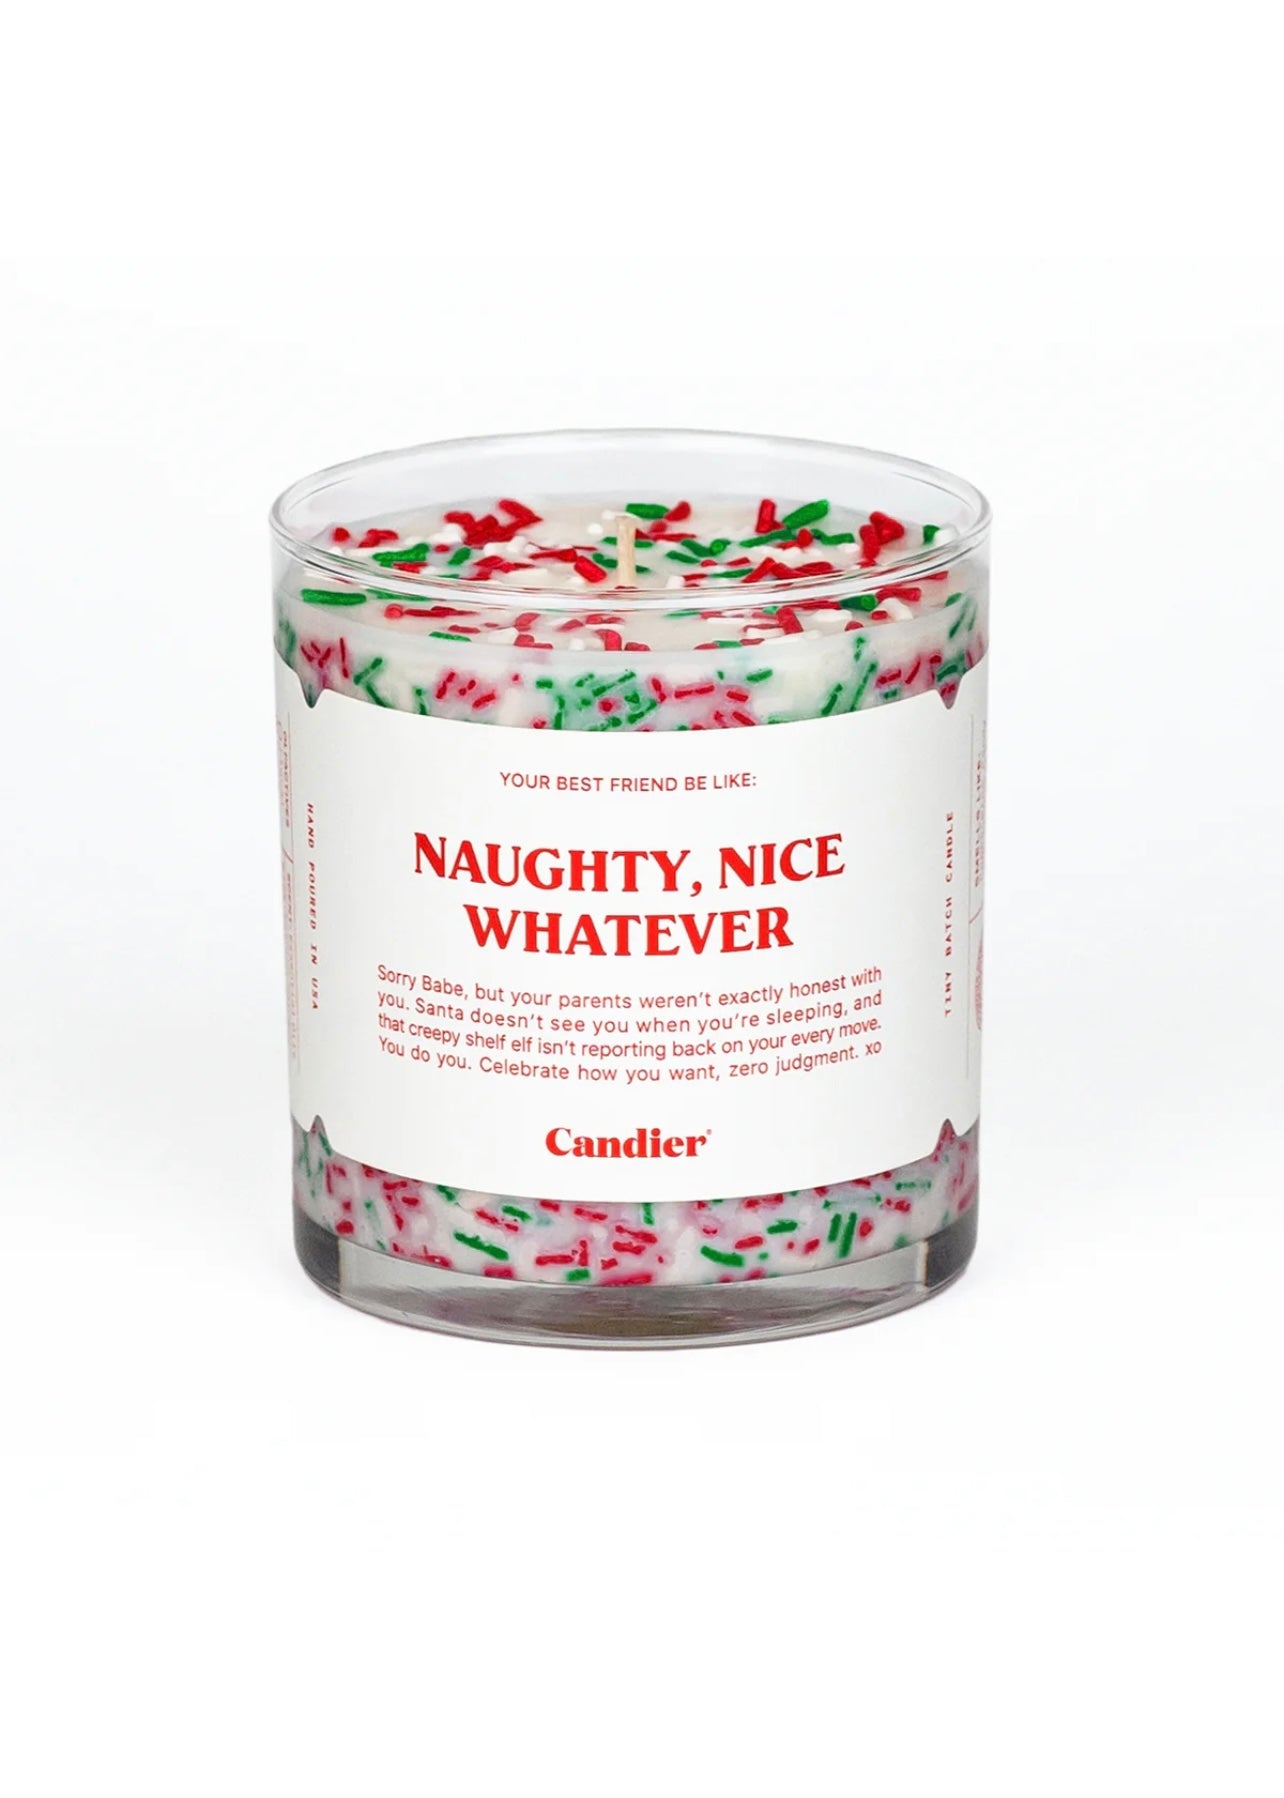 Candier Candles "Naughty, Nice, Whatever"